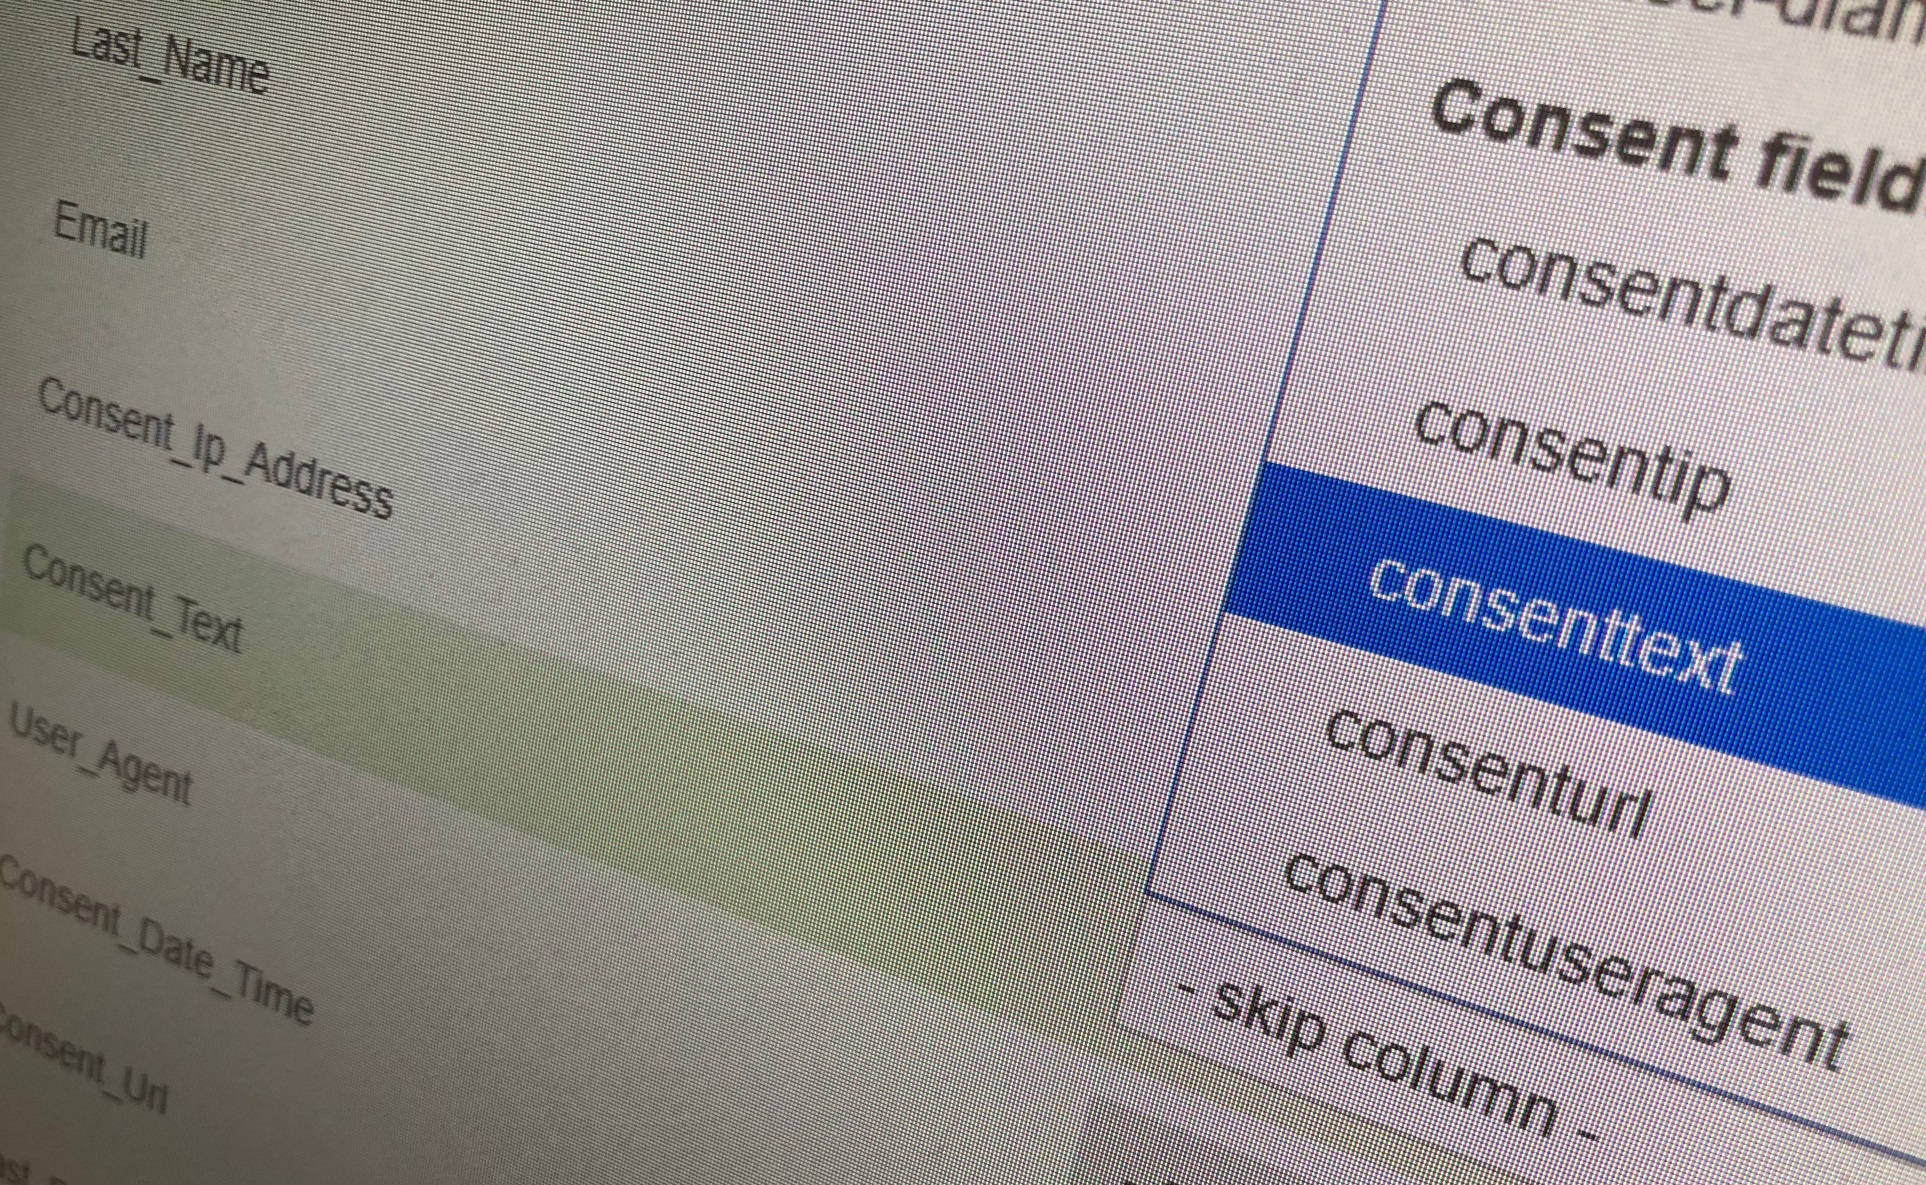 New for GDPR: Keep track of contact consent Featured Image